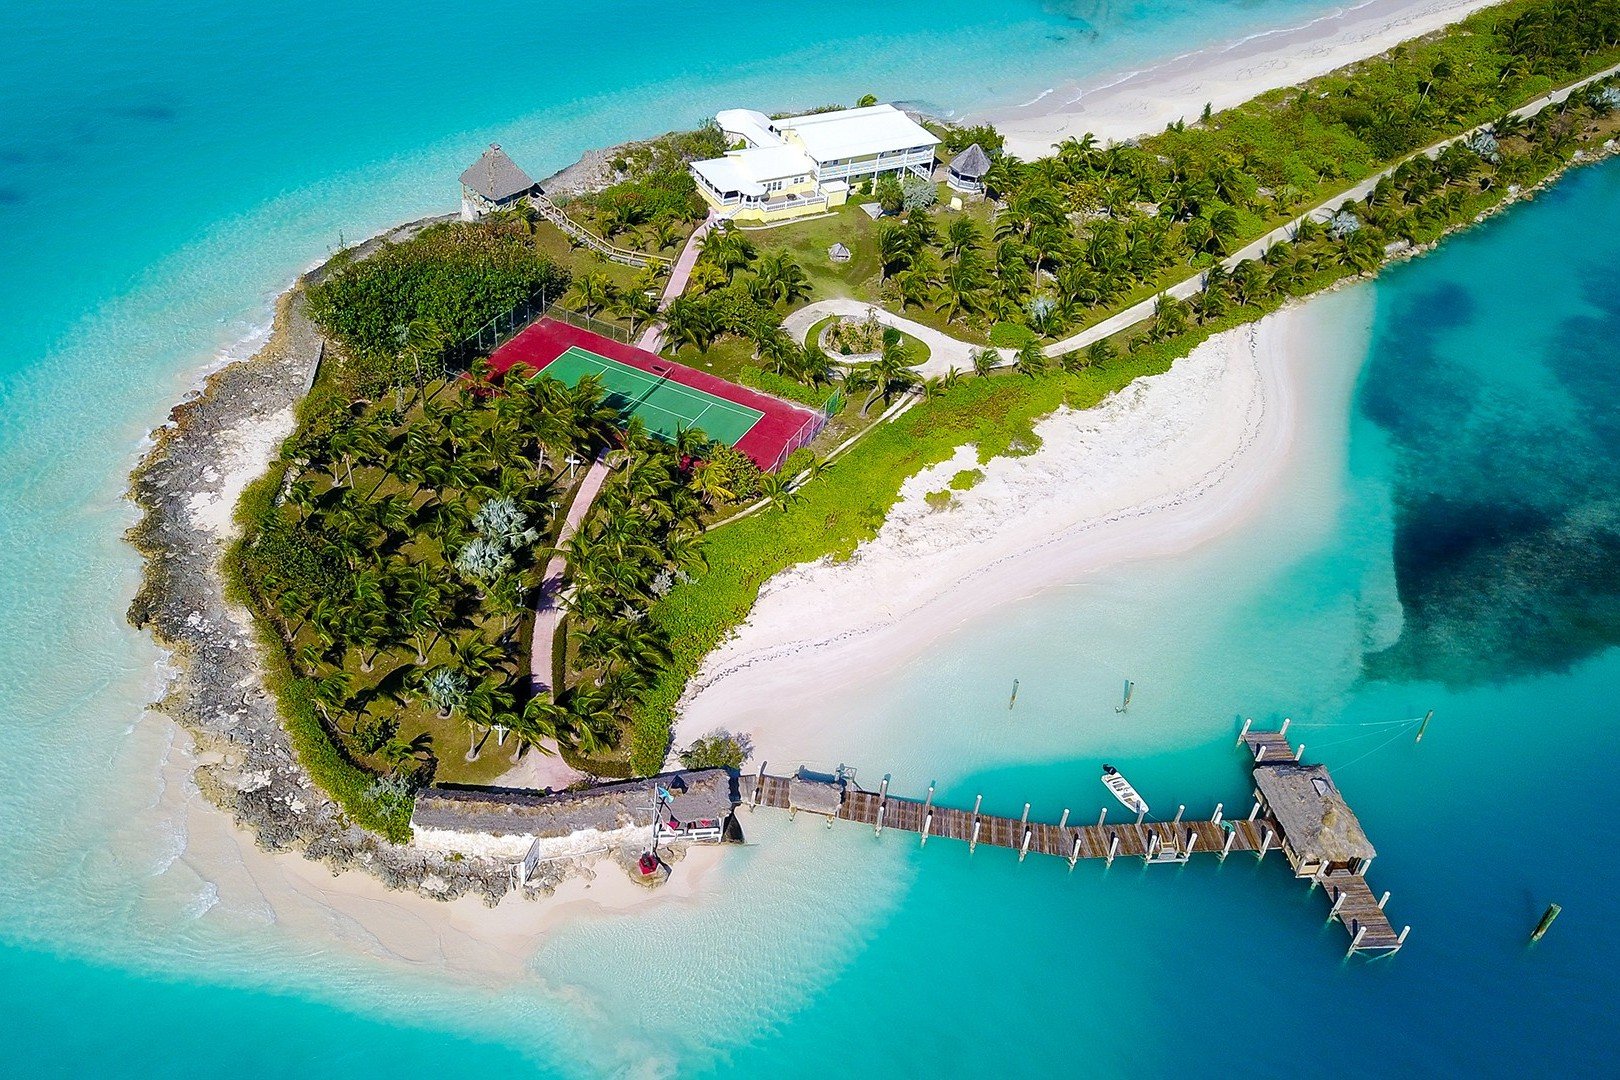 How much does a private island cost: Gun Point, North Eleuthera, Bahamas, $23,000,000.